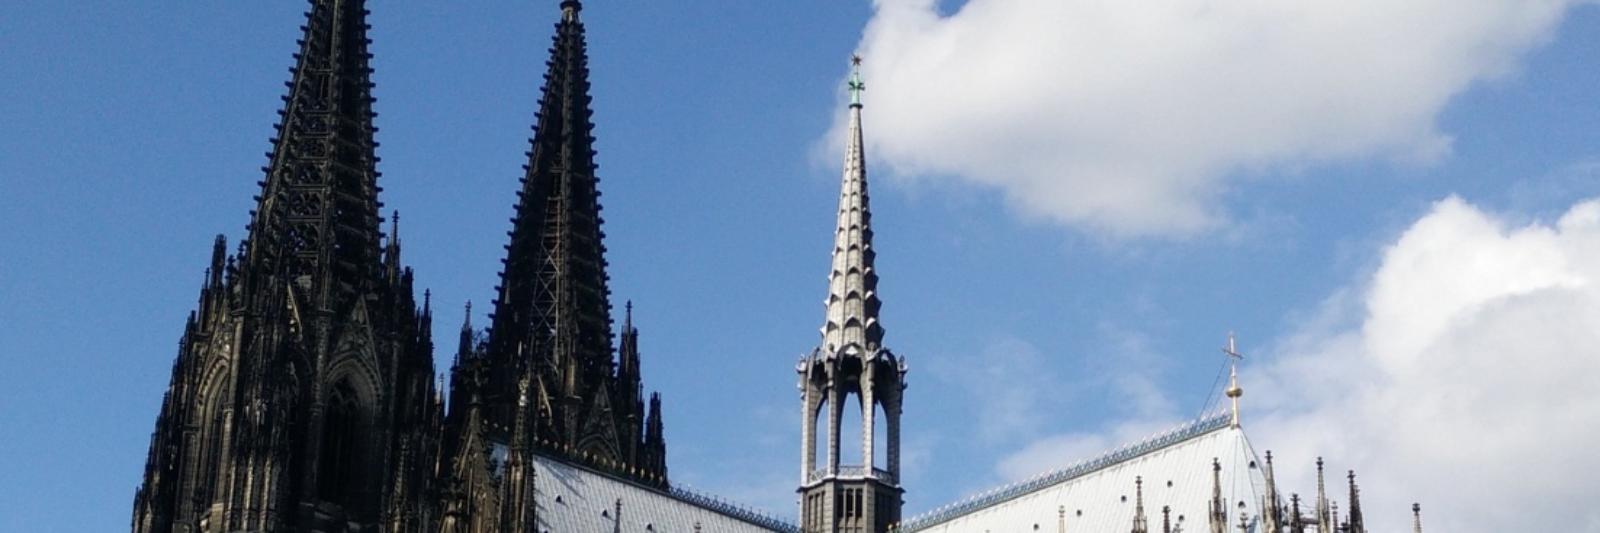 cologne-cathedral-2847871_1920